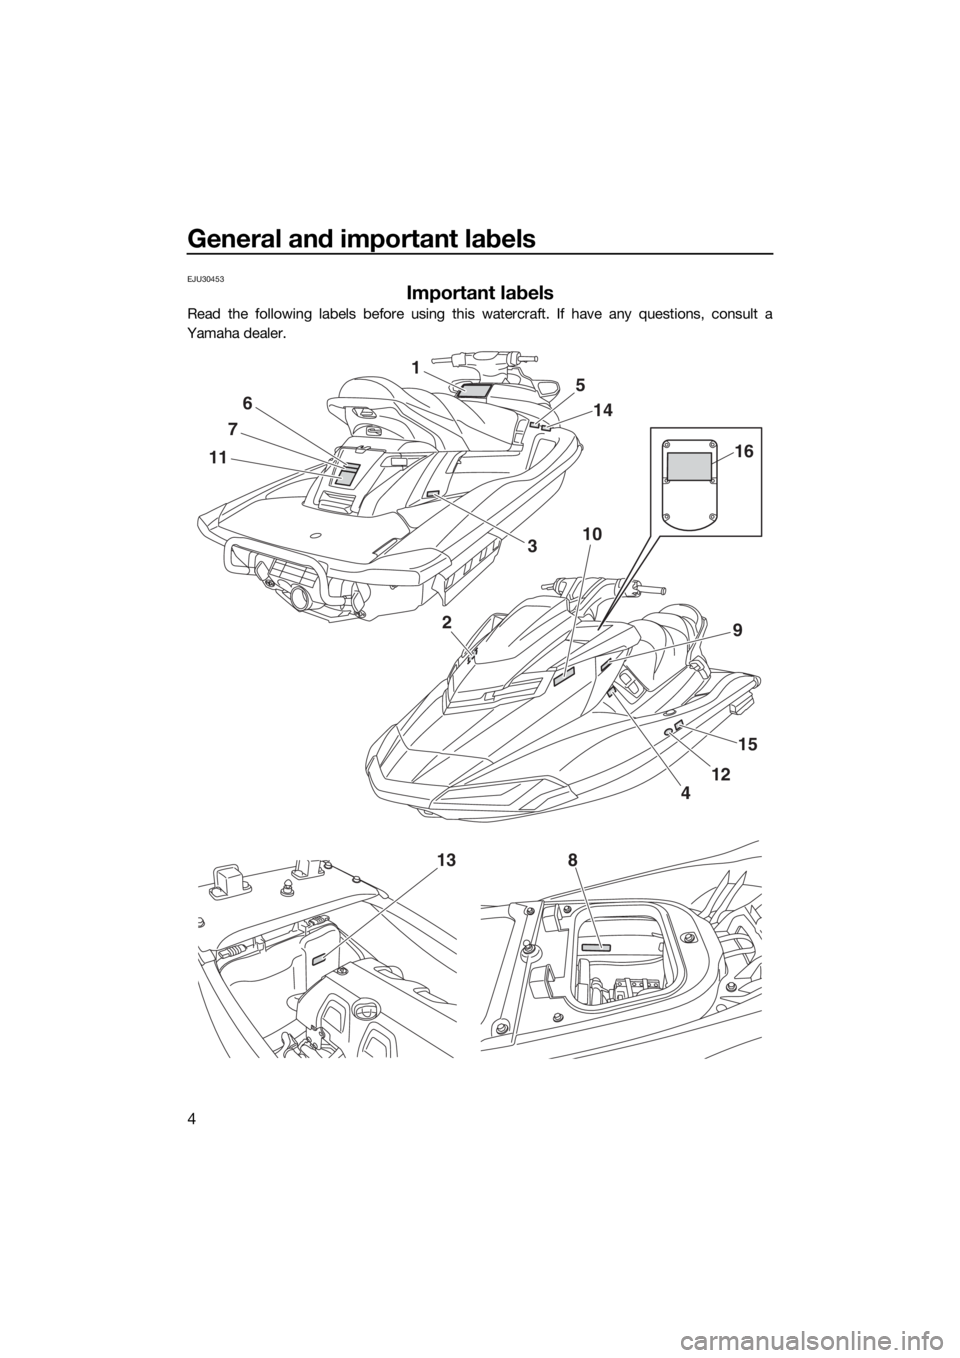 YAMAHA FX HO CRUISER 2018  Owners Manual General and important labels
4
EJU30453
Important labels
Read the following labels before using this watercraft. If have any questions, consult a
Yamaha dealer.
1
11
7
6
10
92
8
4
15
12
5
14
3
16
13
U